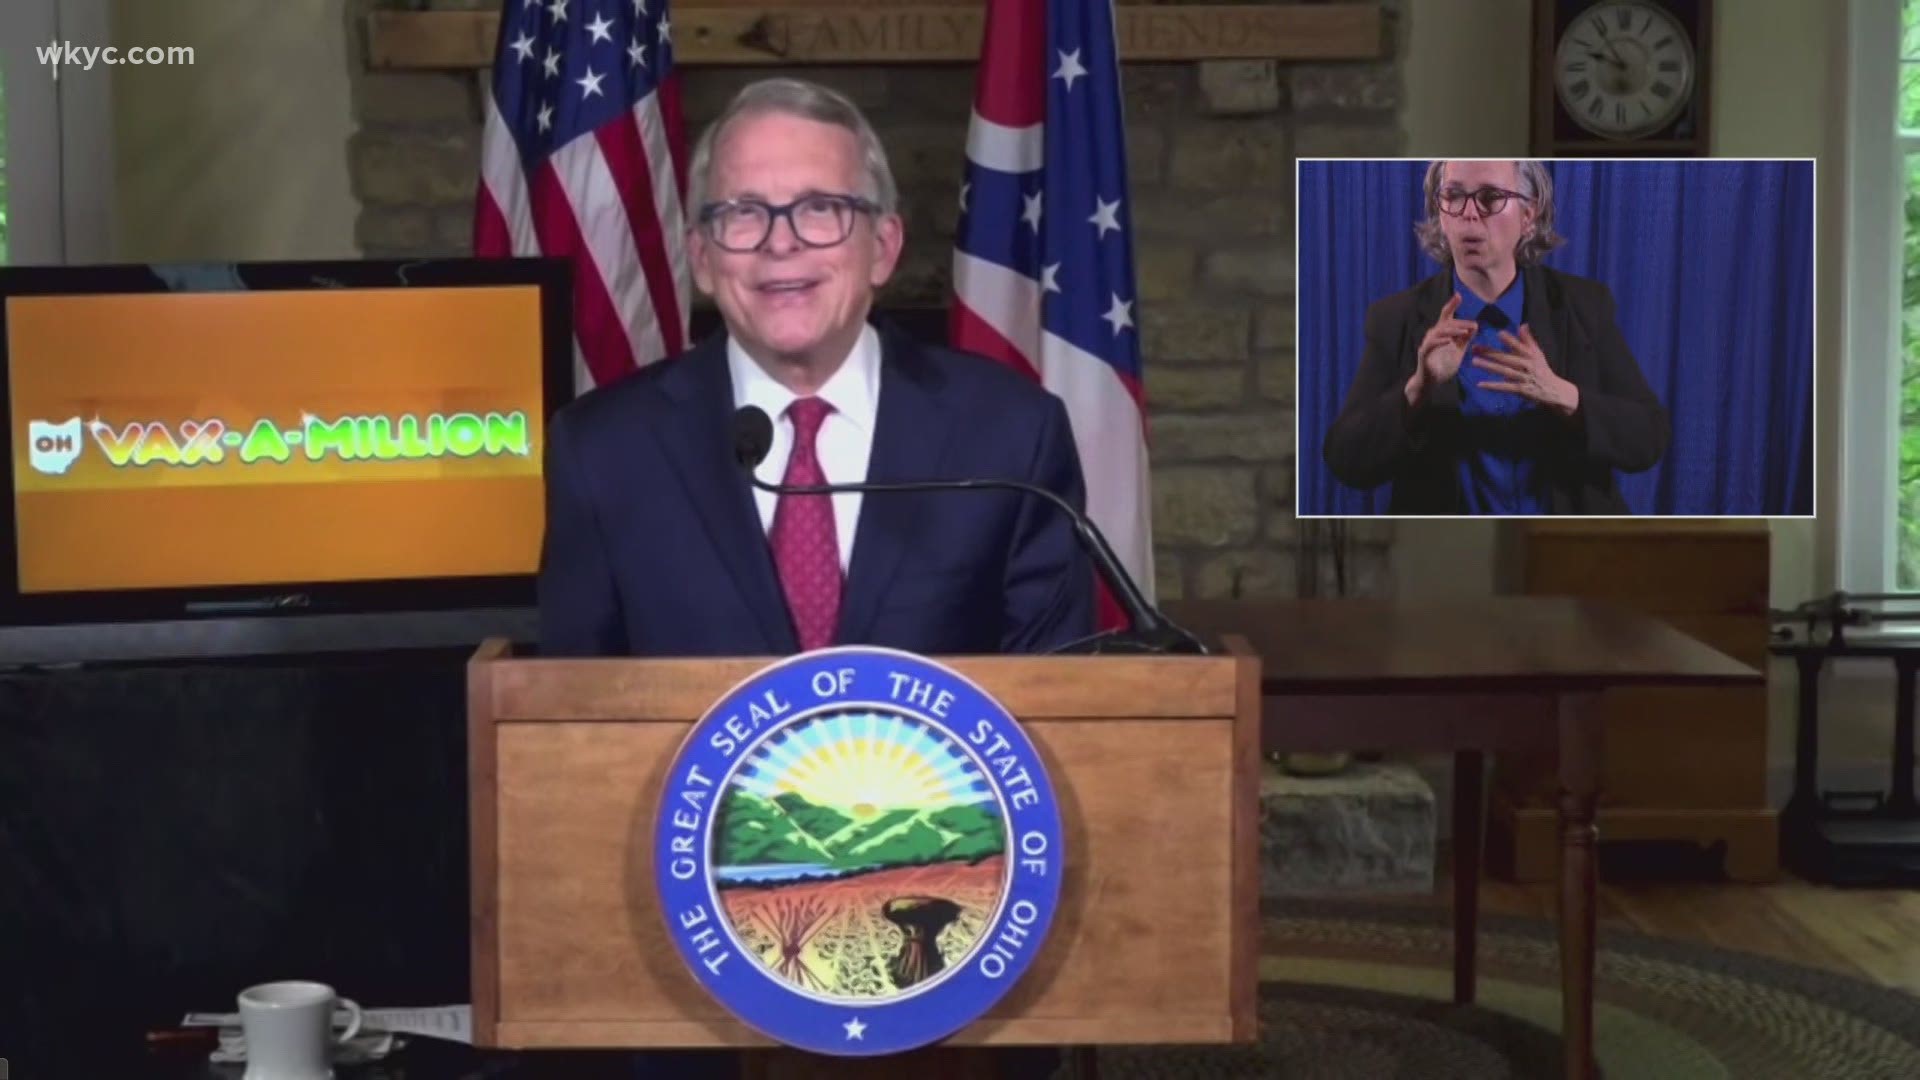 Ohio Gov. Mike DeWine said his team is working on announcing some additional COVID vaccine incentives soon.